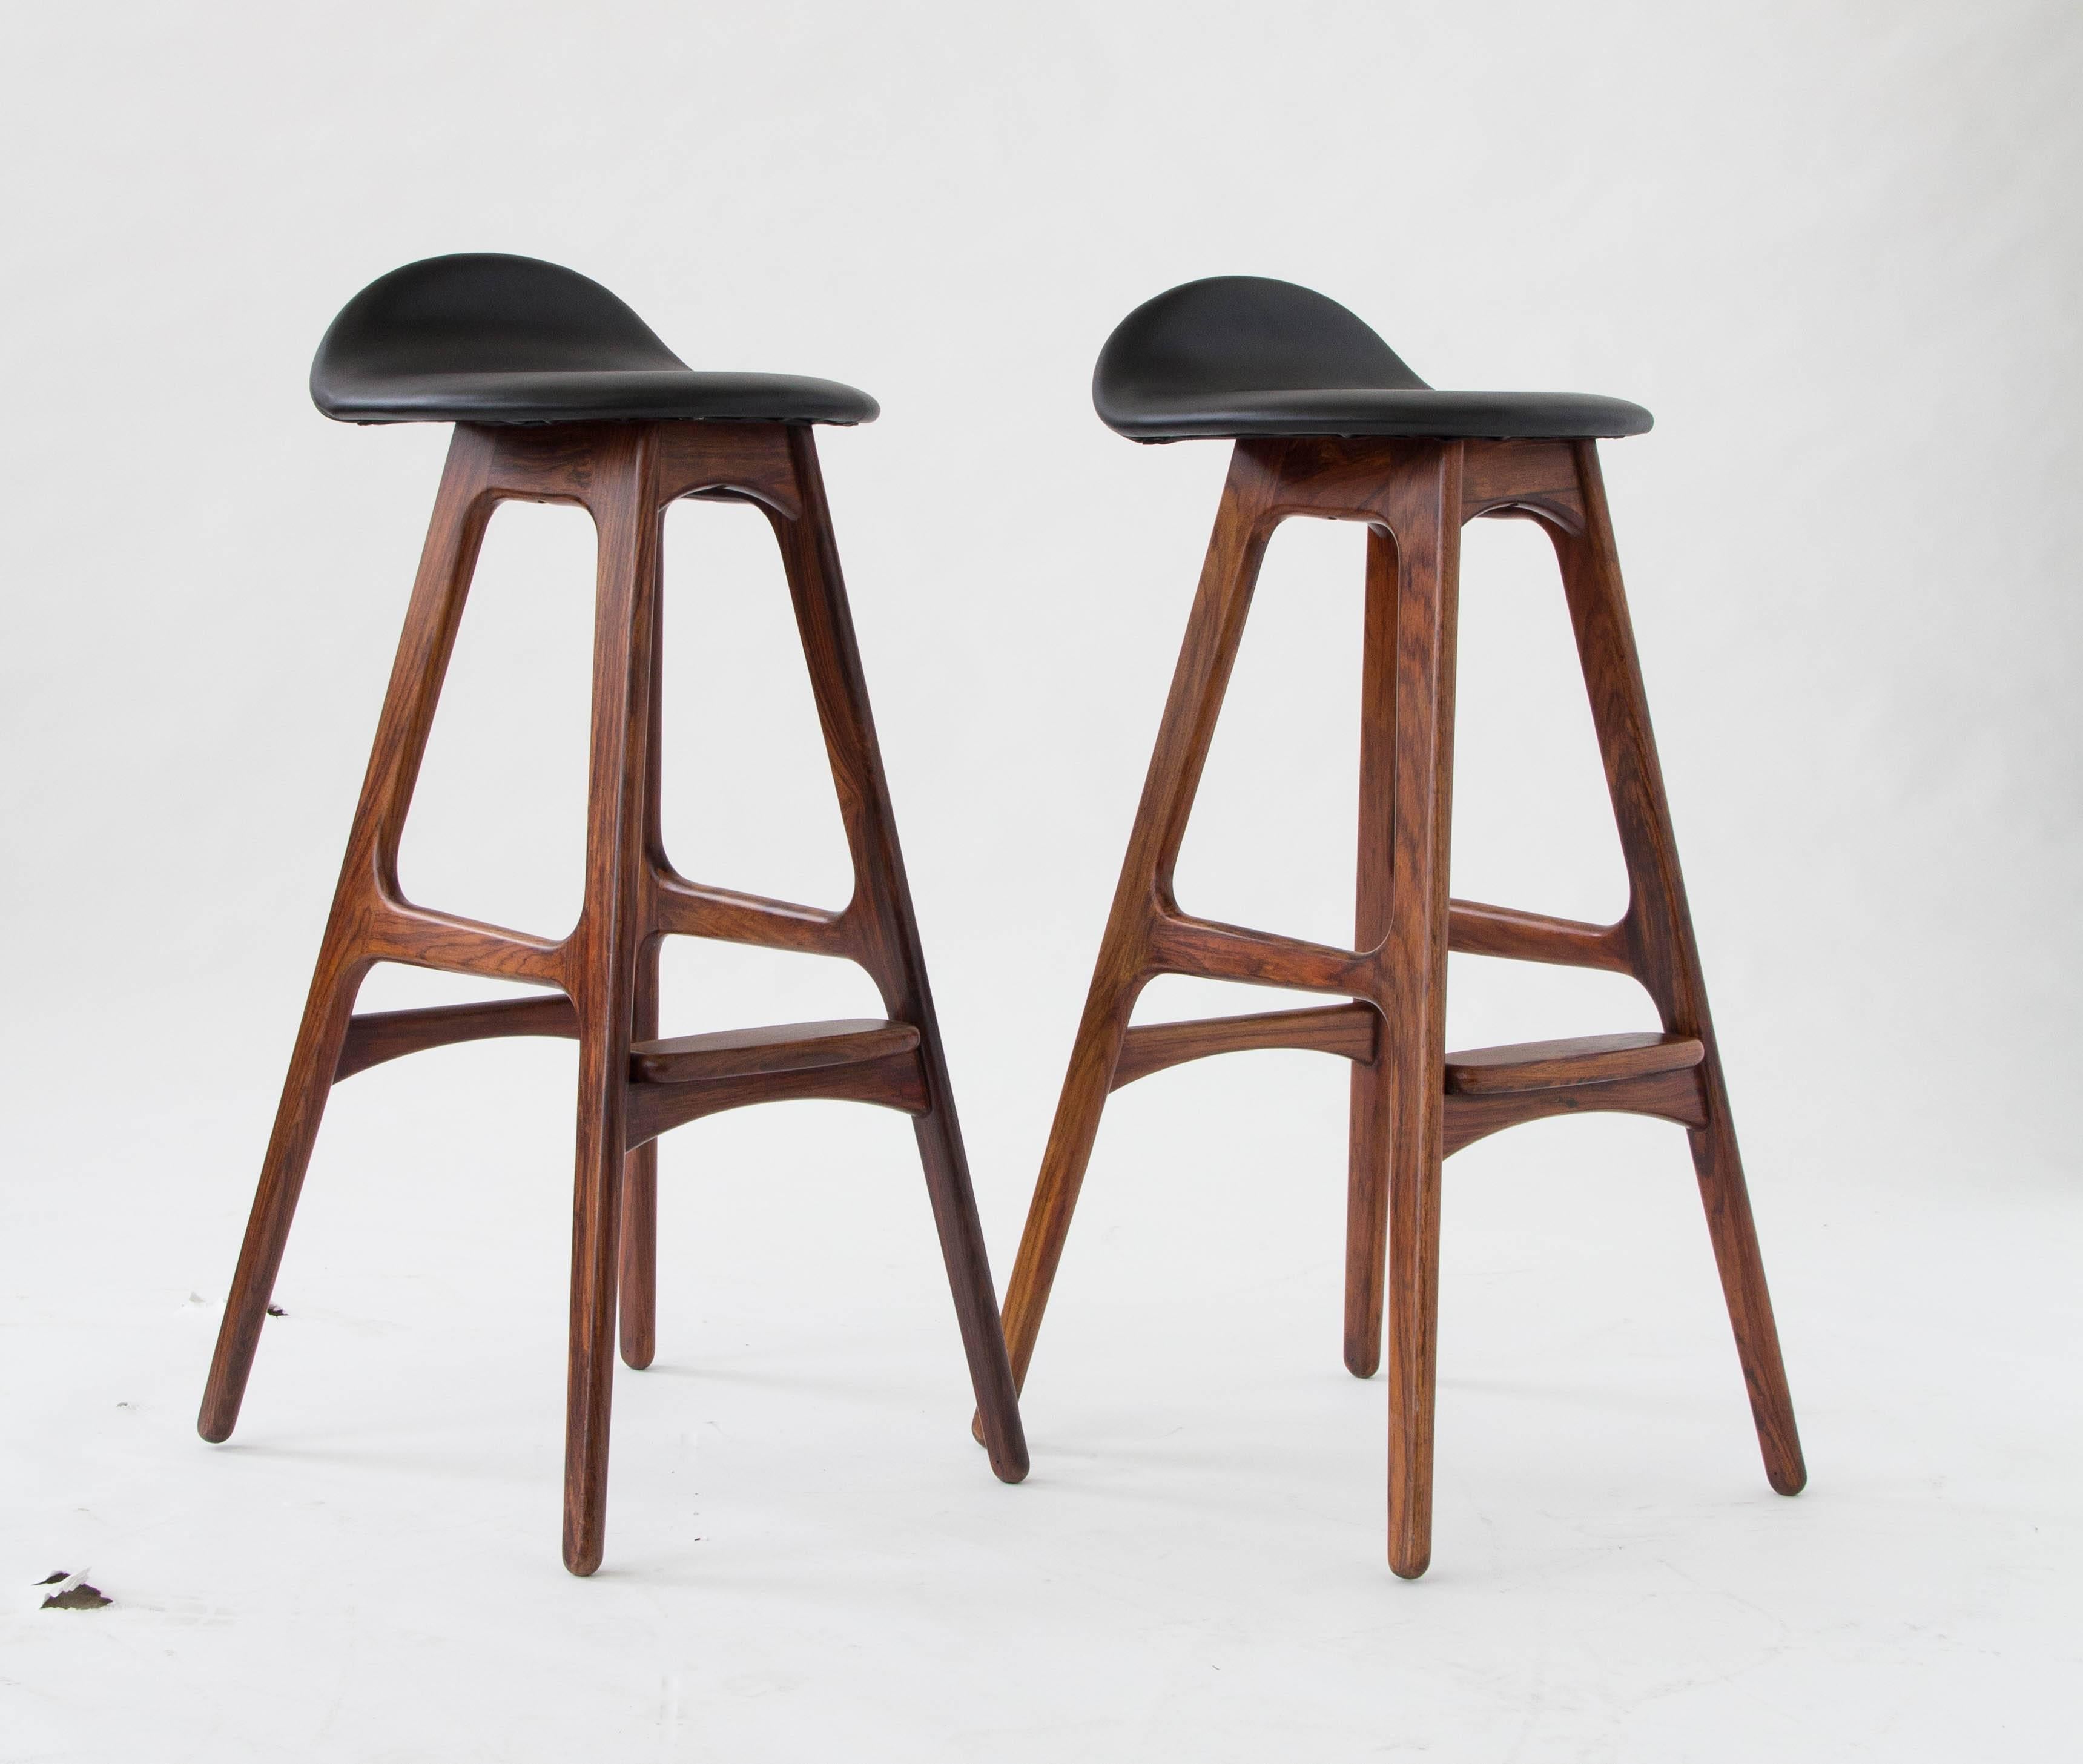 A pair of bar stools with rosewood frames designed by Erik Buch and produced by O.D. Møbler of Denmark. The frames are sculpted with slightly rounded angles and a paddle-shaped footrest in matching rosewood tops the front support. The seats are